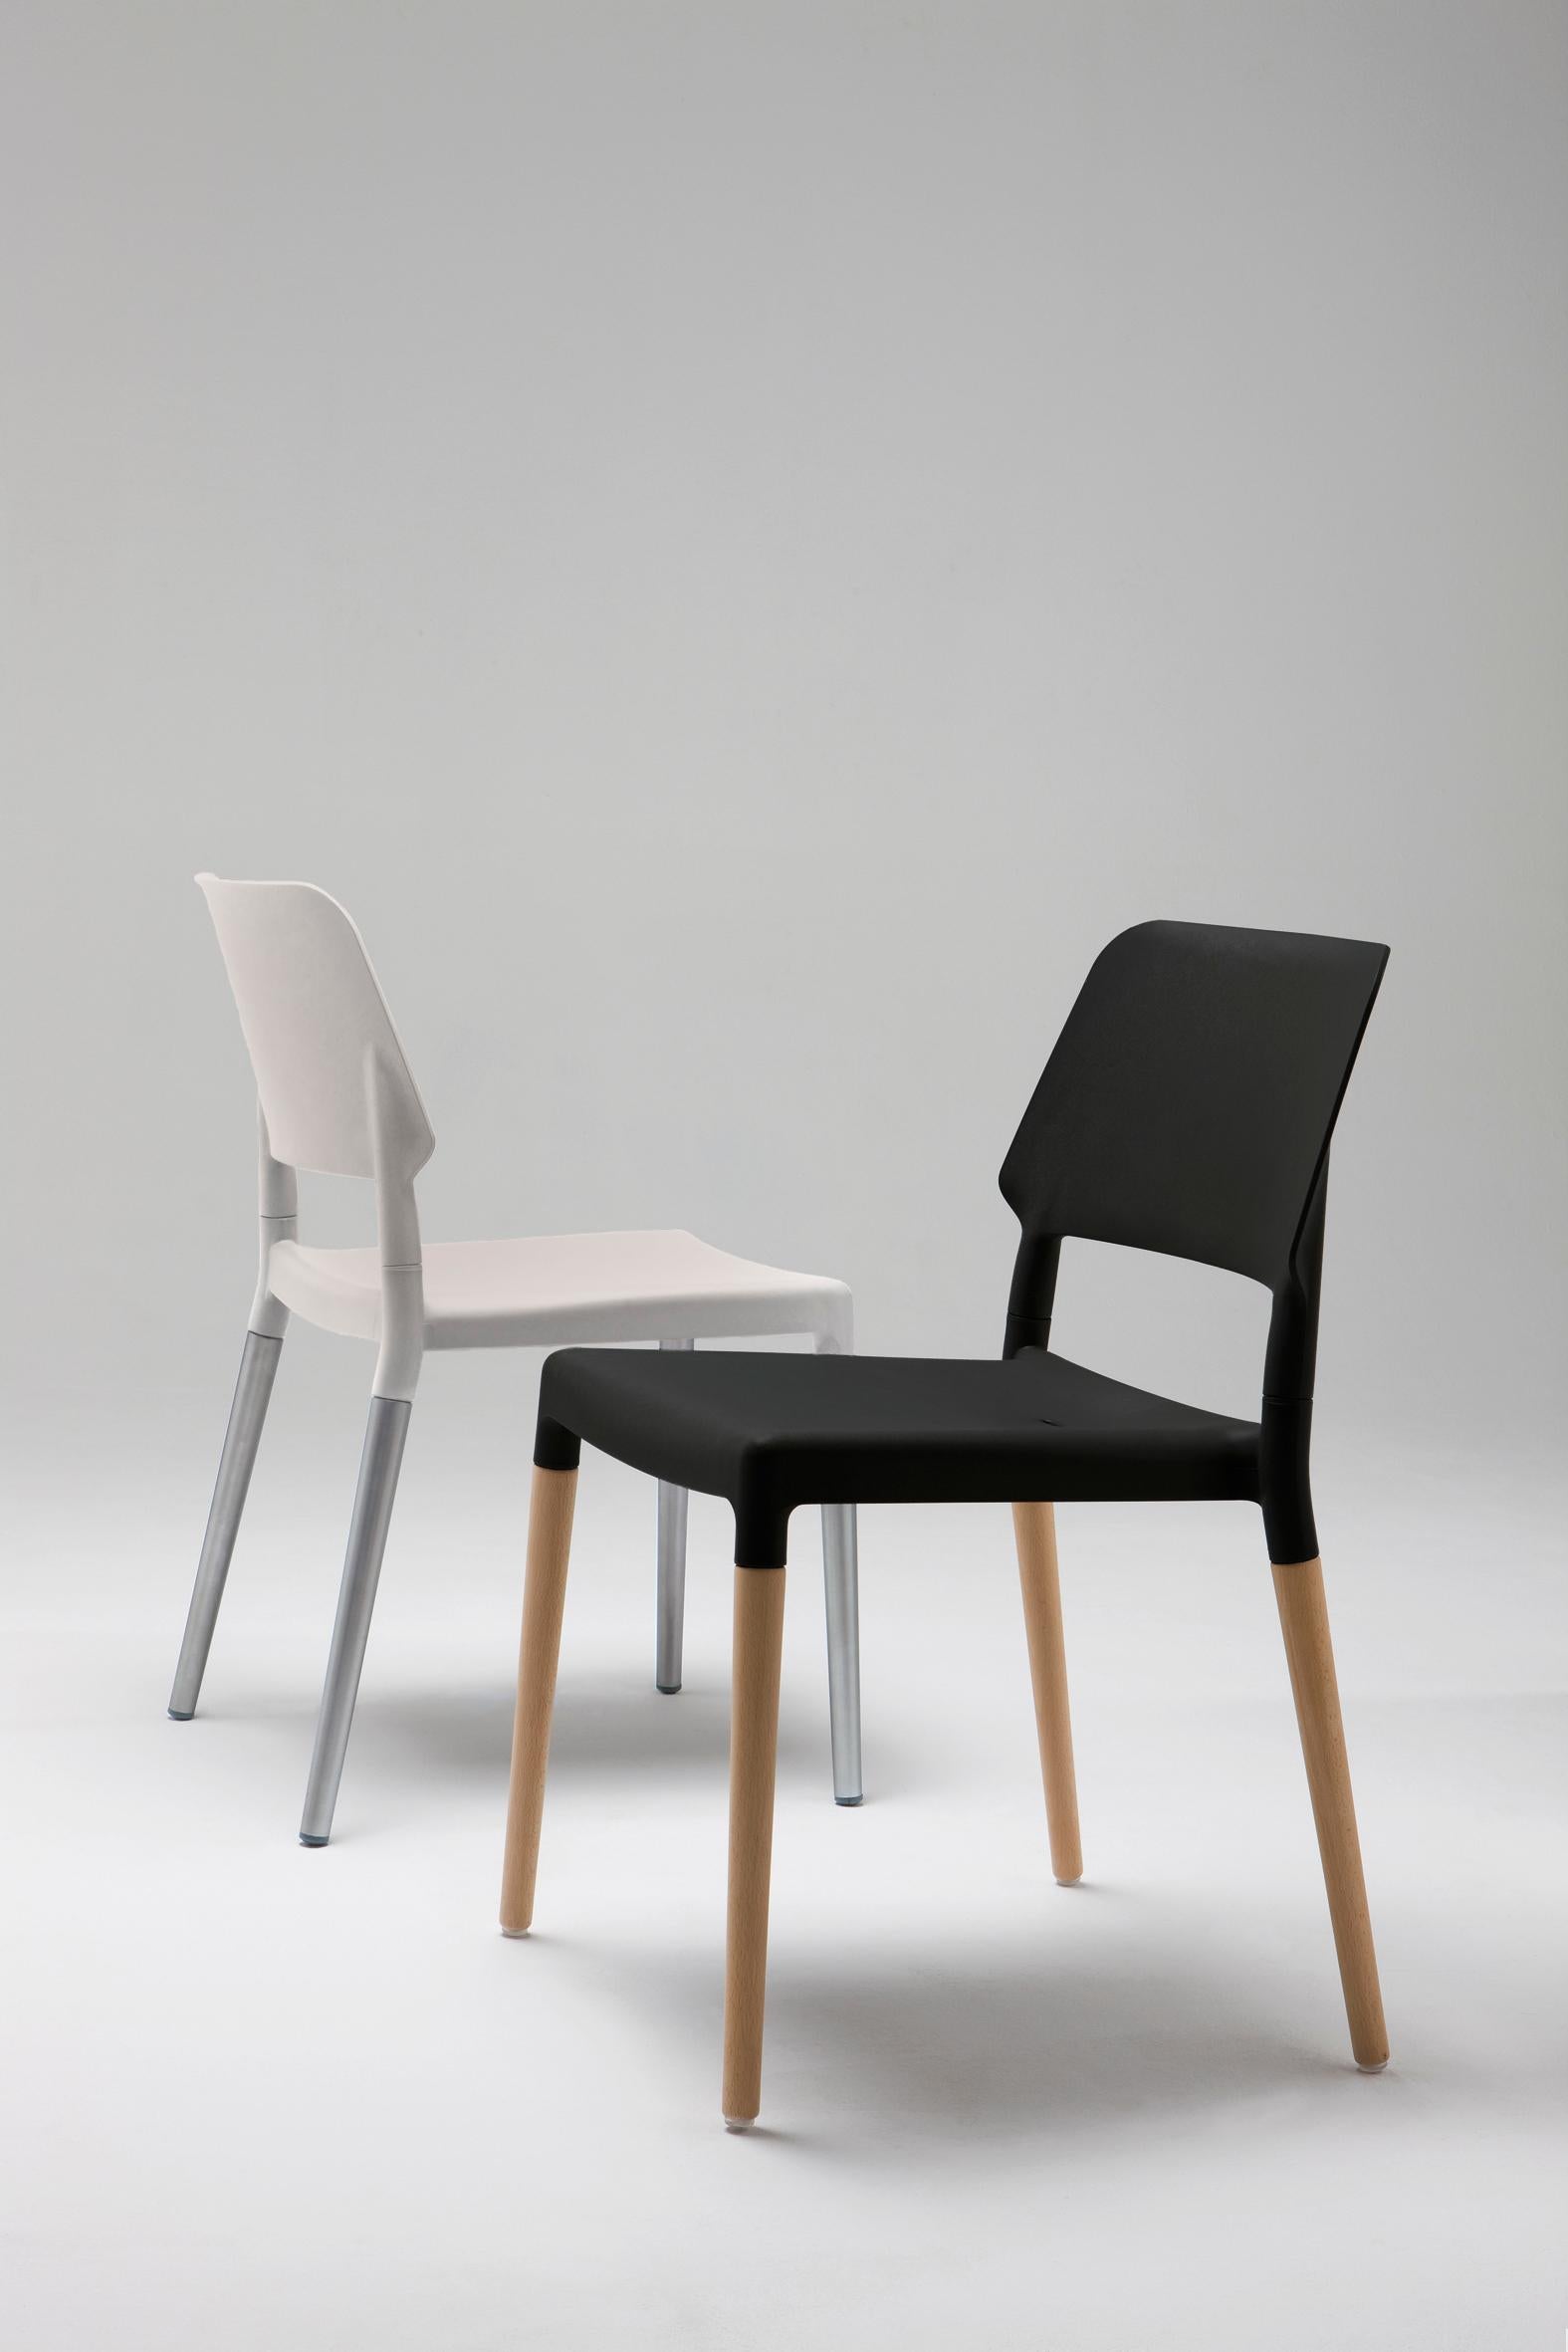 Contemporary Set of 4 Belloch Dining Chair by Lagranja Design